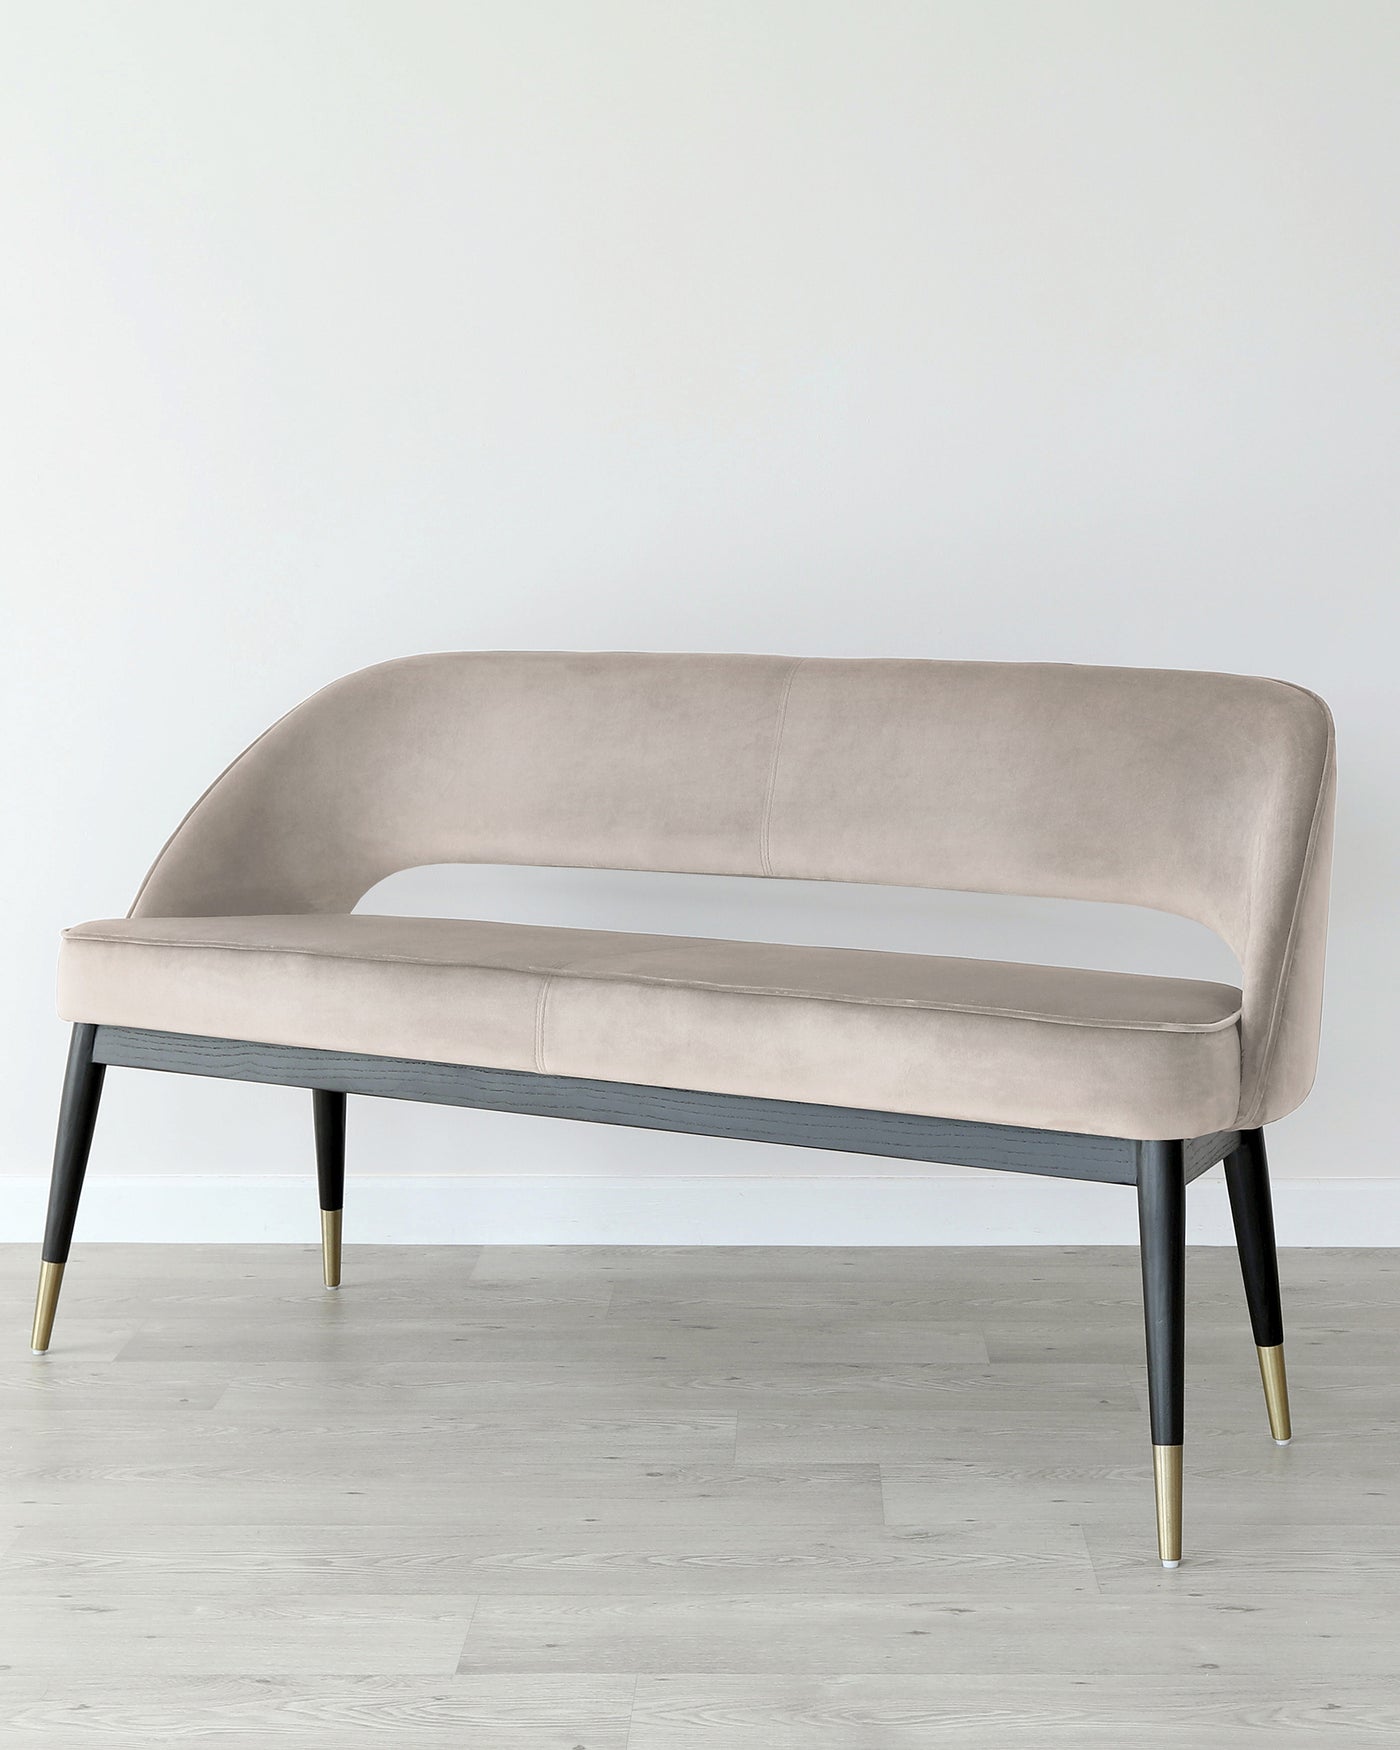 Elegant contemporary bench with a smooth, curvilinear silhouette, upholstered in a light beige fabric with a plush finish. The bench stands on four tapered wooden legs in black, accented with stylish gold-finished metal tips, set against a simple grey-floored and white-walled backdrop.